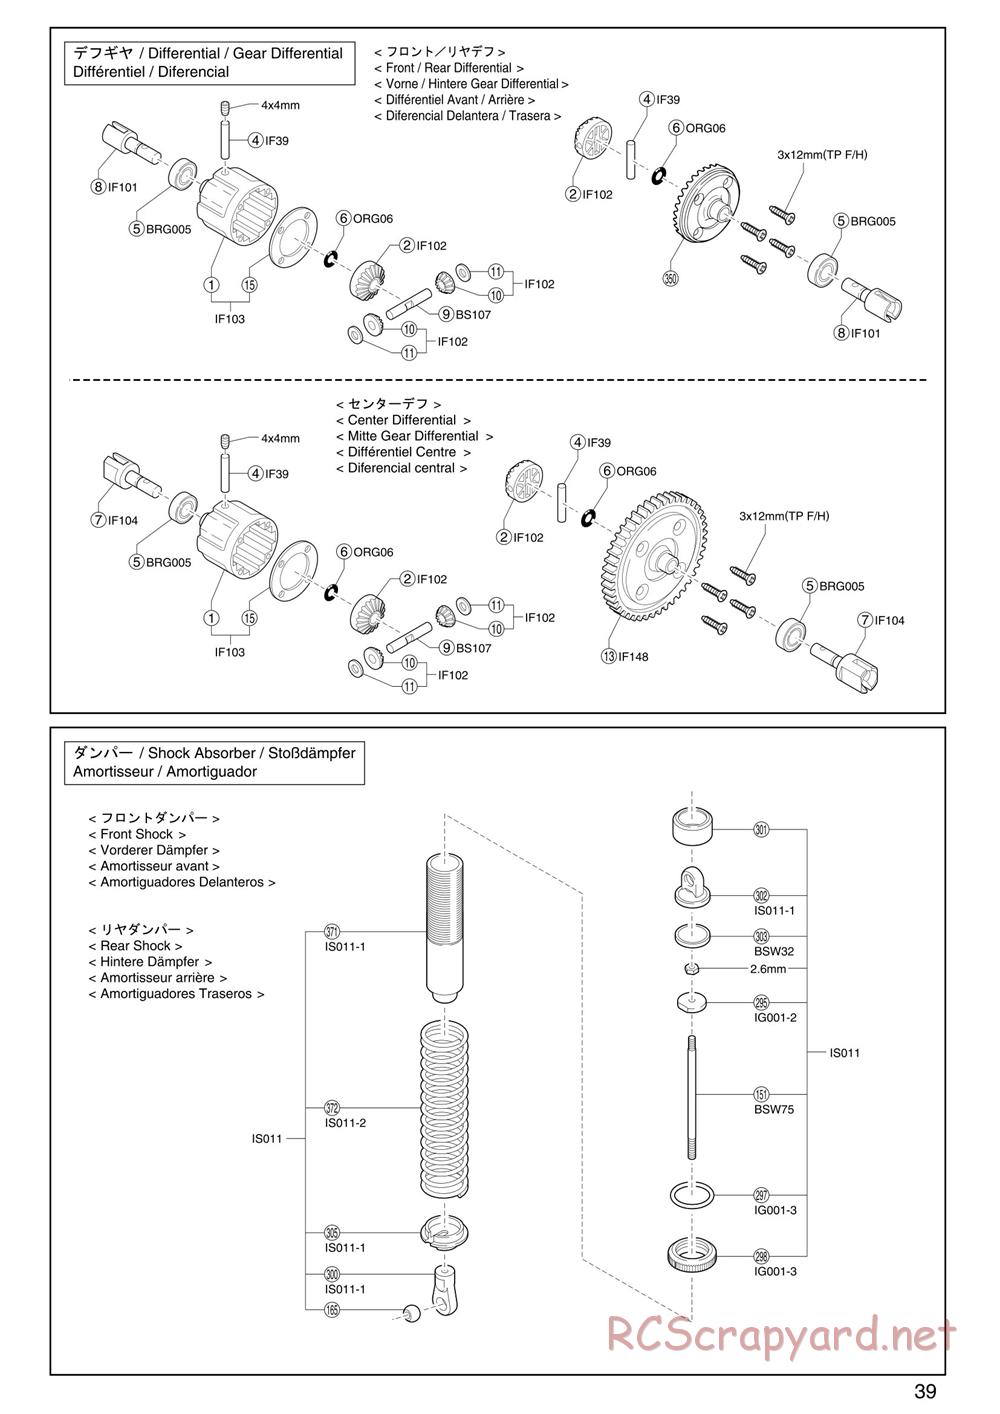 Kyosho - Inferno ST (2005) - Exploded Views - Page 6